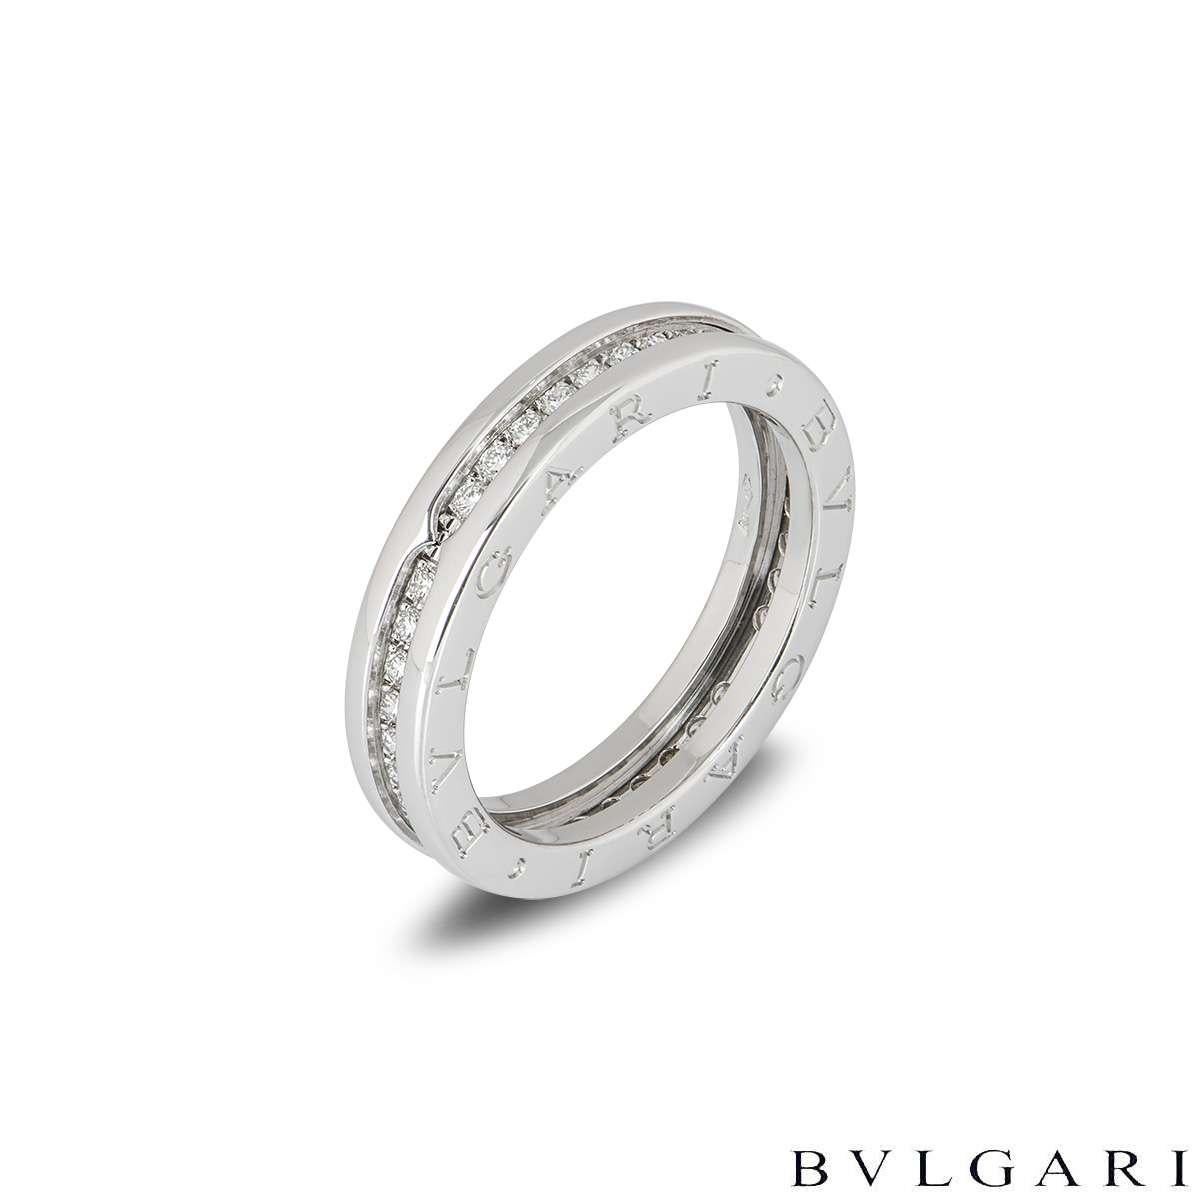 A stylish 18k white gold diamond set Bvlgari ring from the B.zero1 collection. The ring is set through the centre with 38 round brilliant cut diamonds totalling 0.43ct. The ring features the iconic 'Bvlgari Bvlgari' engraving to the outer edges. The